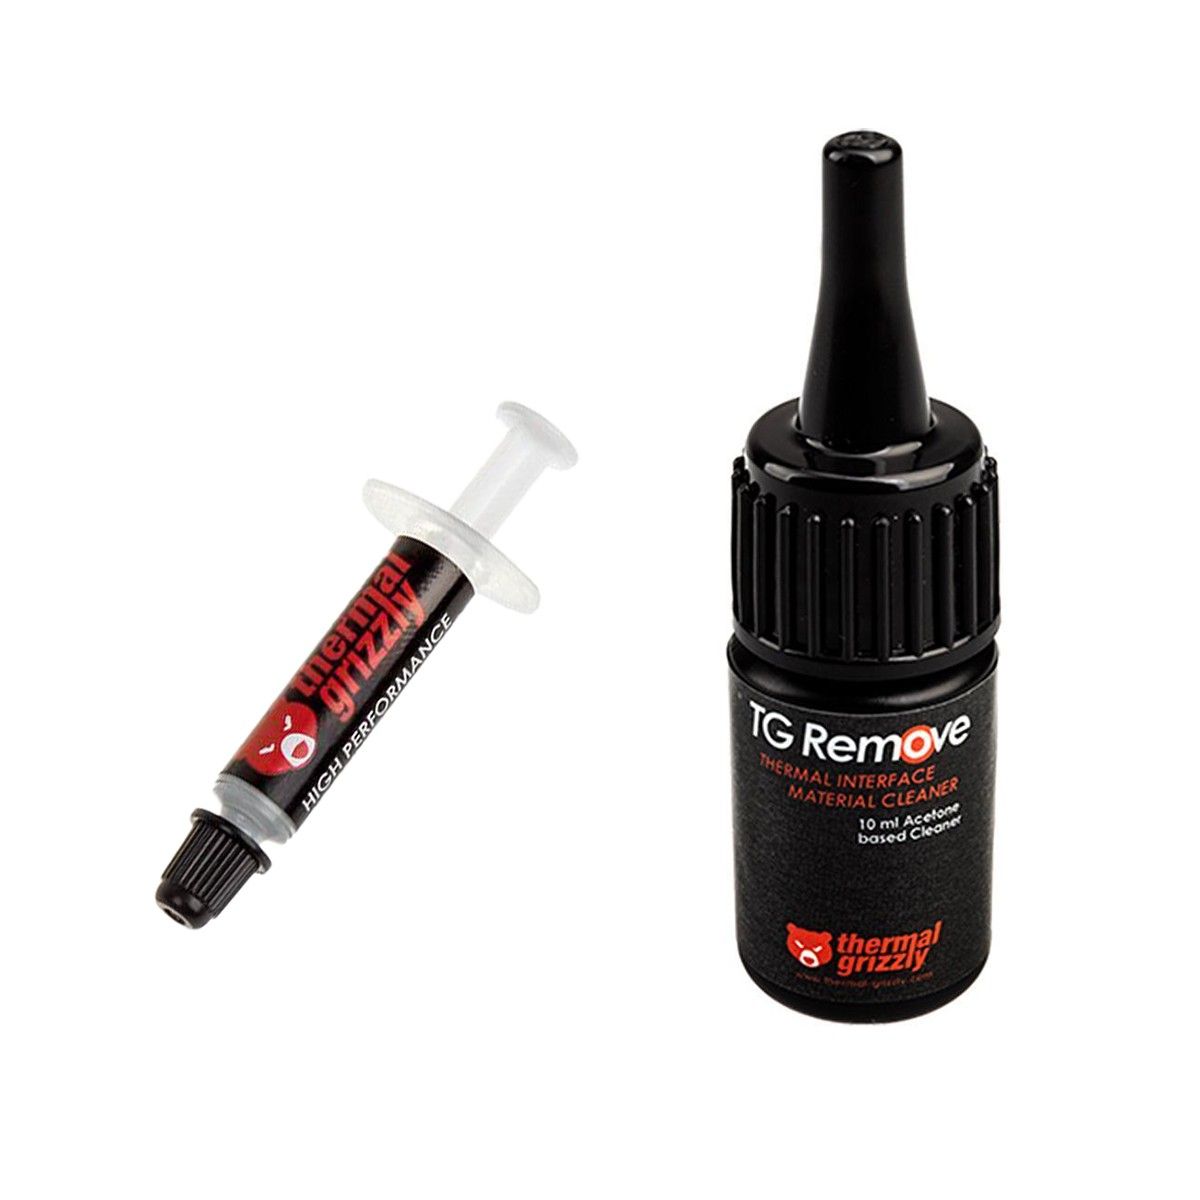 Thermal Grizzly Kryonaut Thermal Paste (1g) and TG-Remove (10mL)